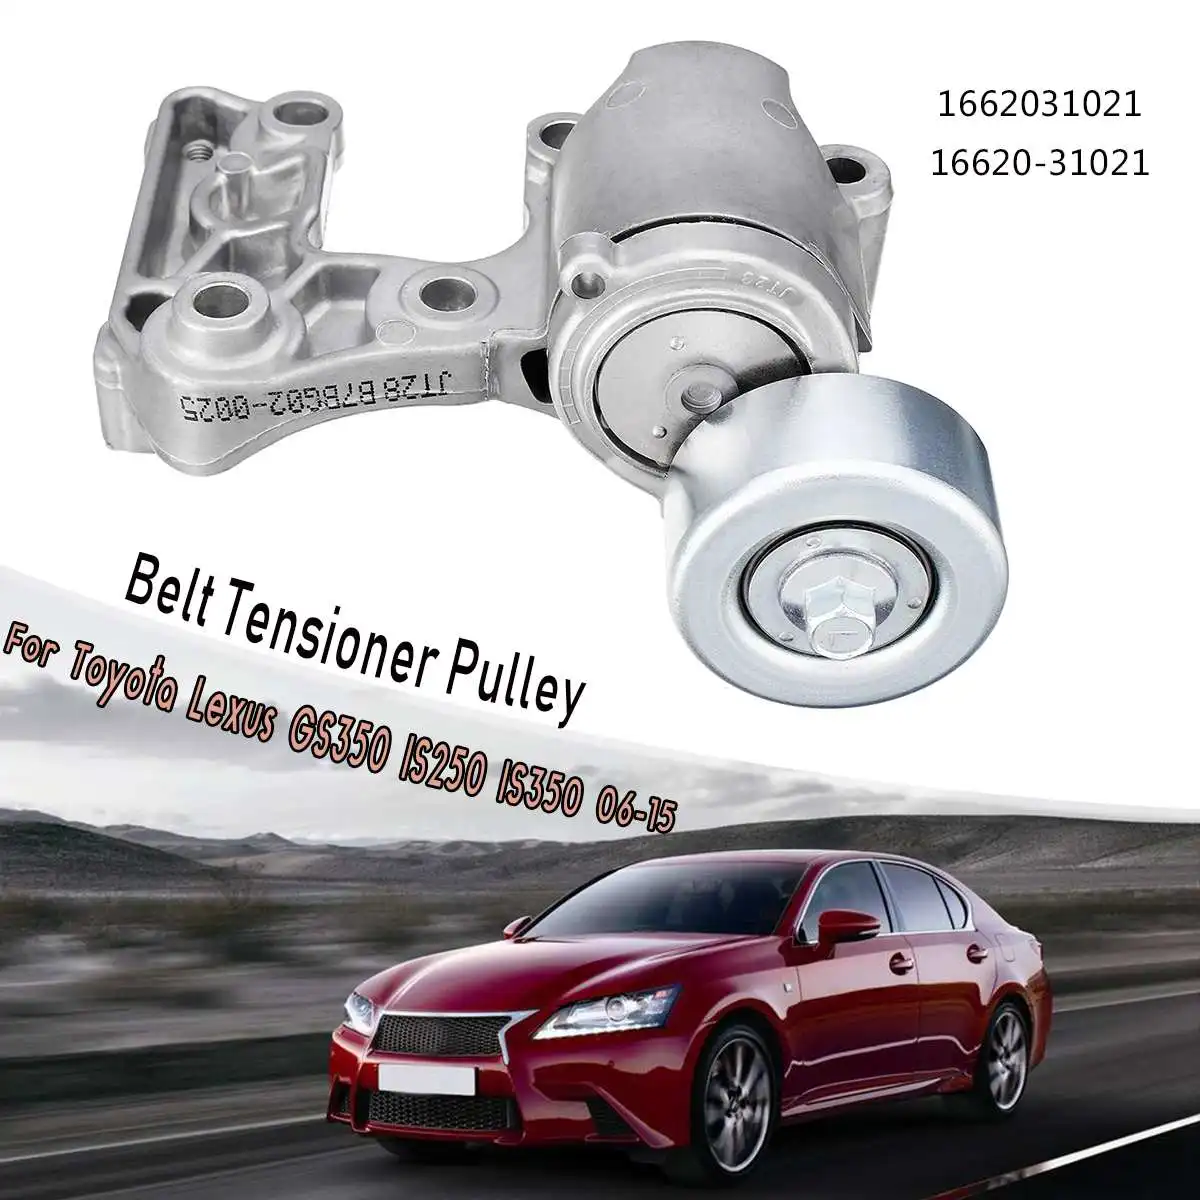 

Drive Belt Tensioner Pulley For Toyota for Lexus GS350 IS250 IS350 06-15 16620-31021 1662031021